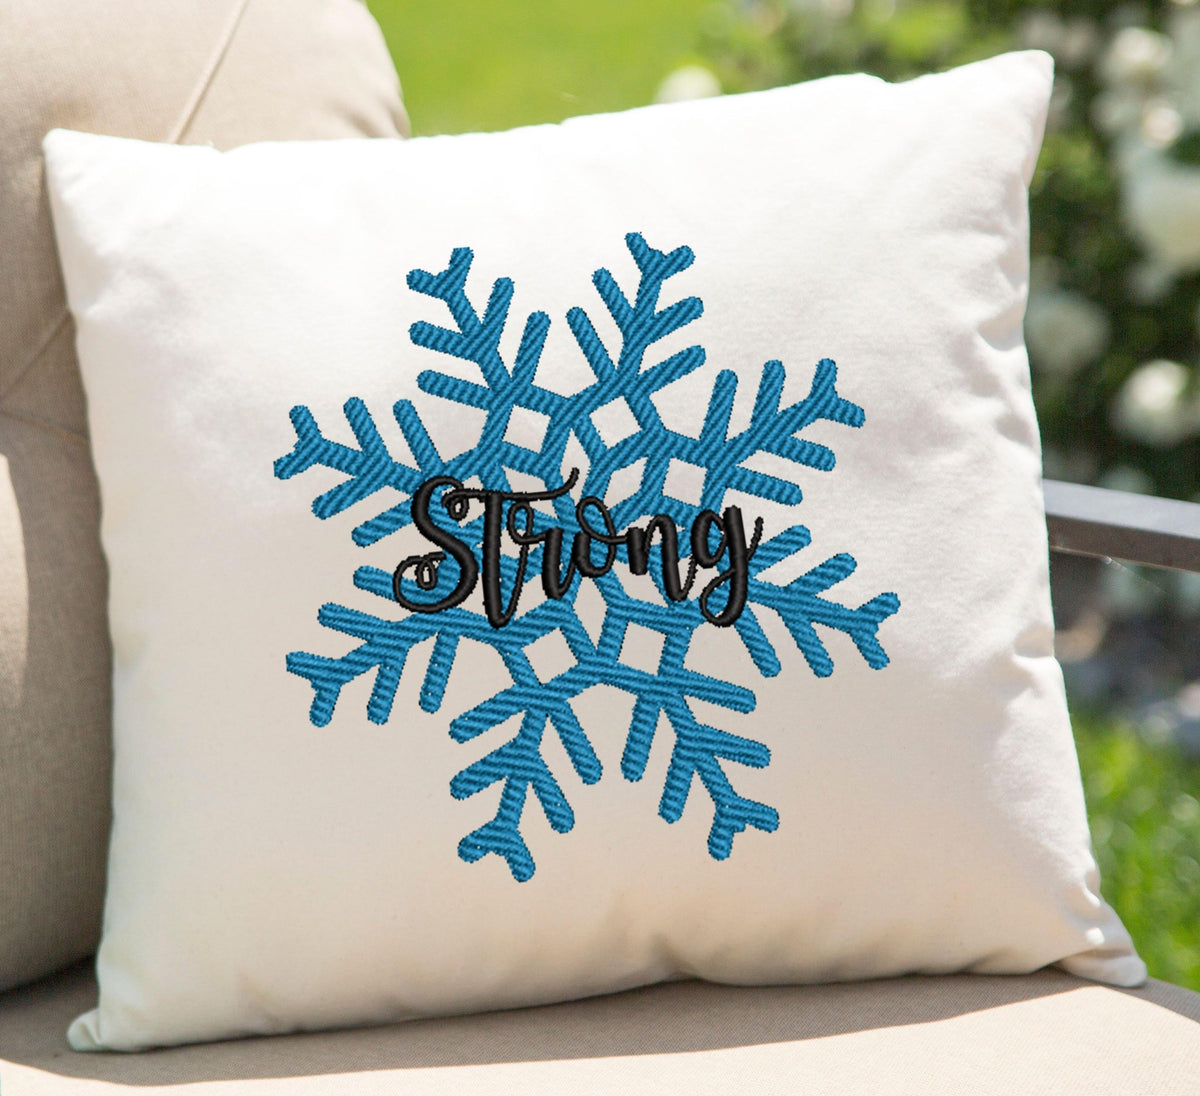 Strong Snow Flake Embroidery Design - Oh My Crafty Supplies Inc.